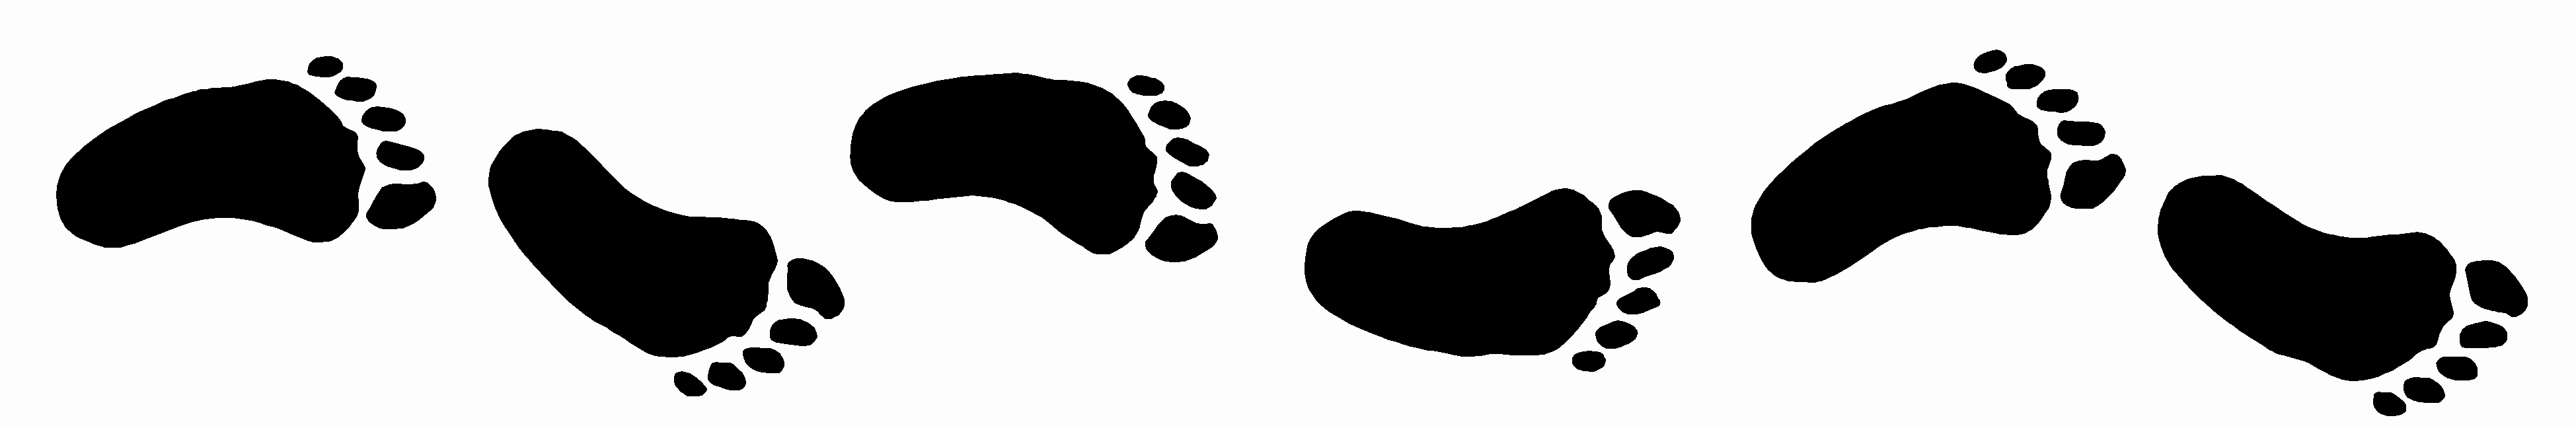 Footsteps clipart small. Free walking footprints cliparts